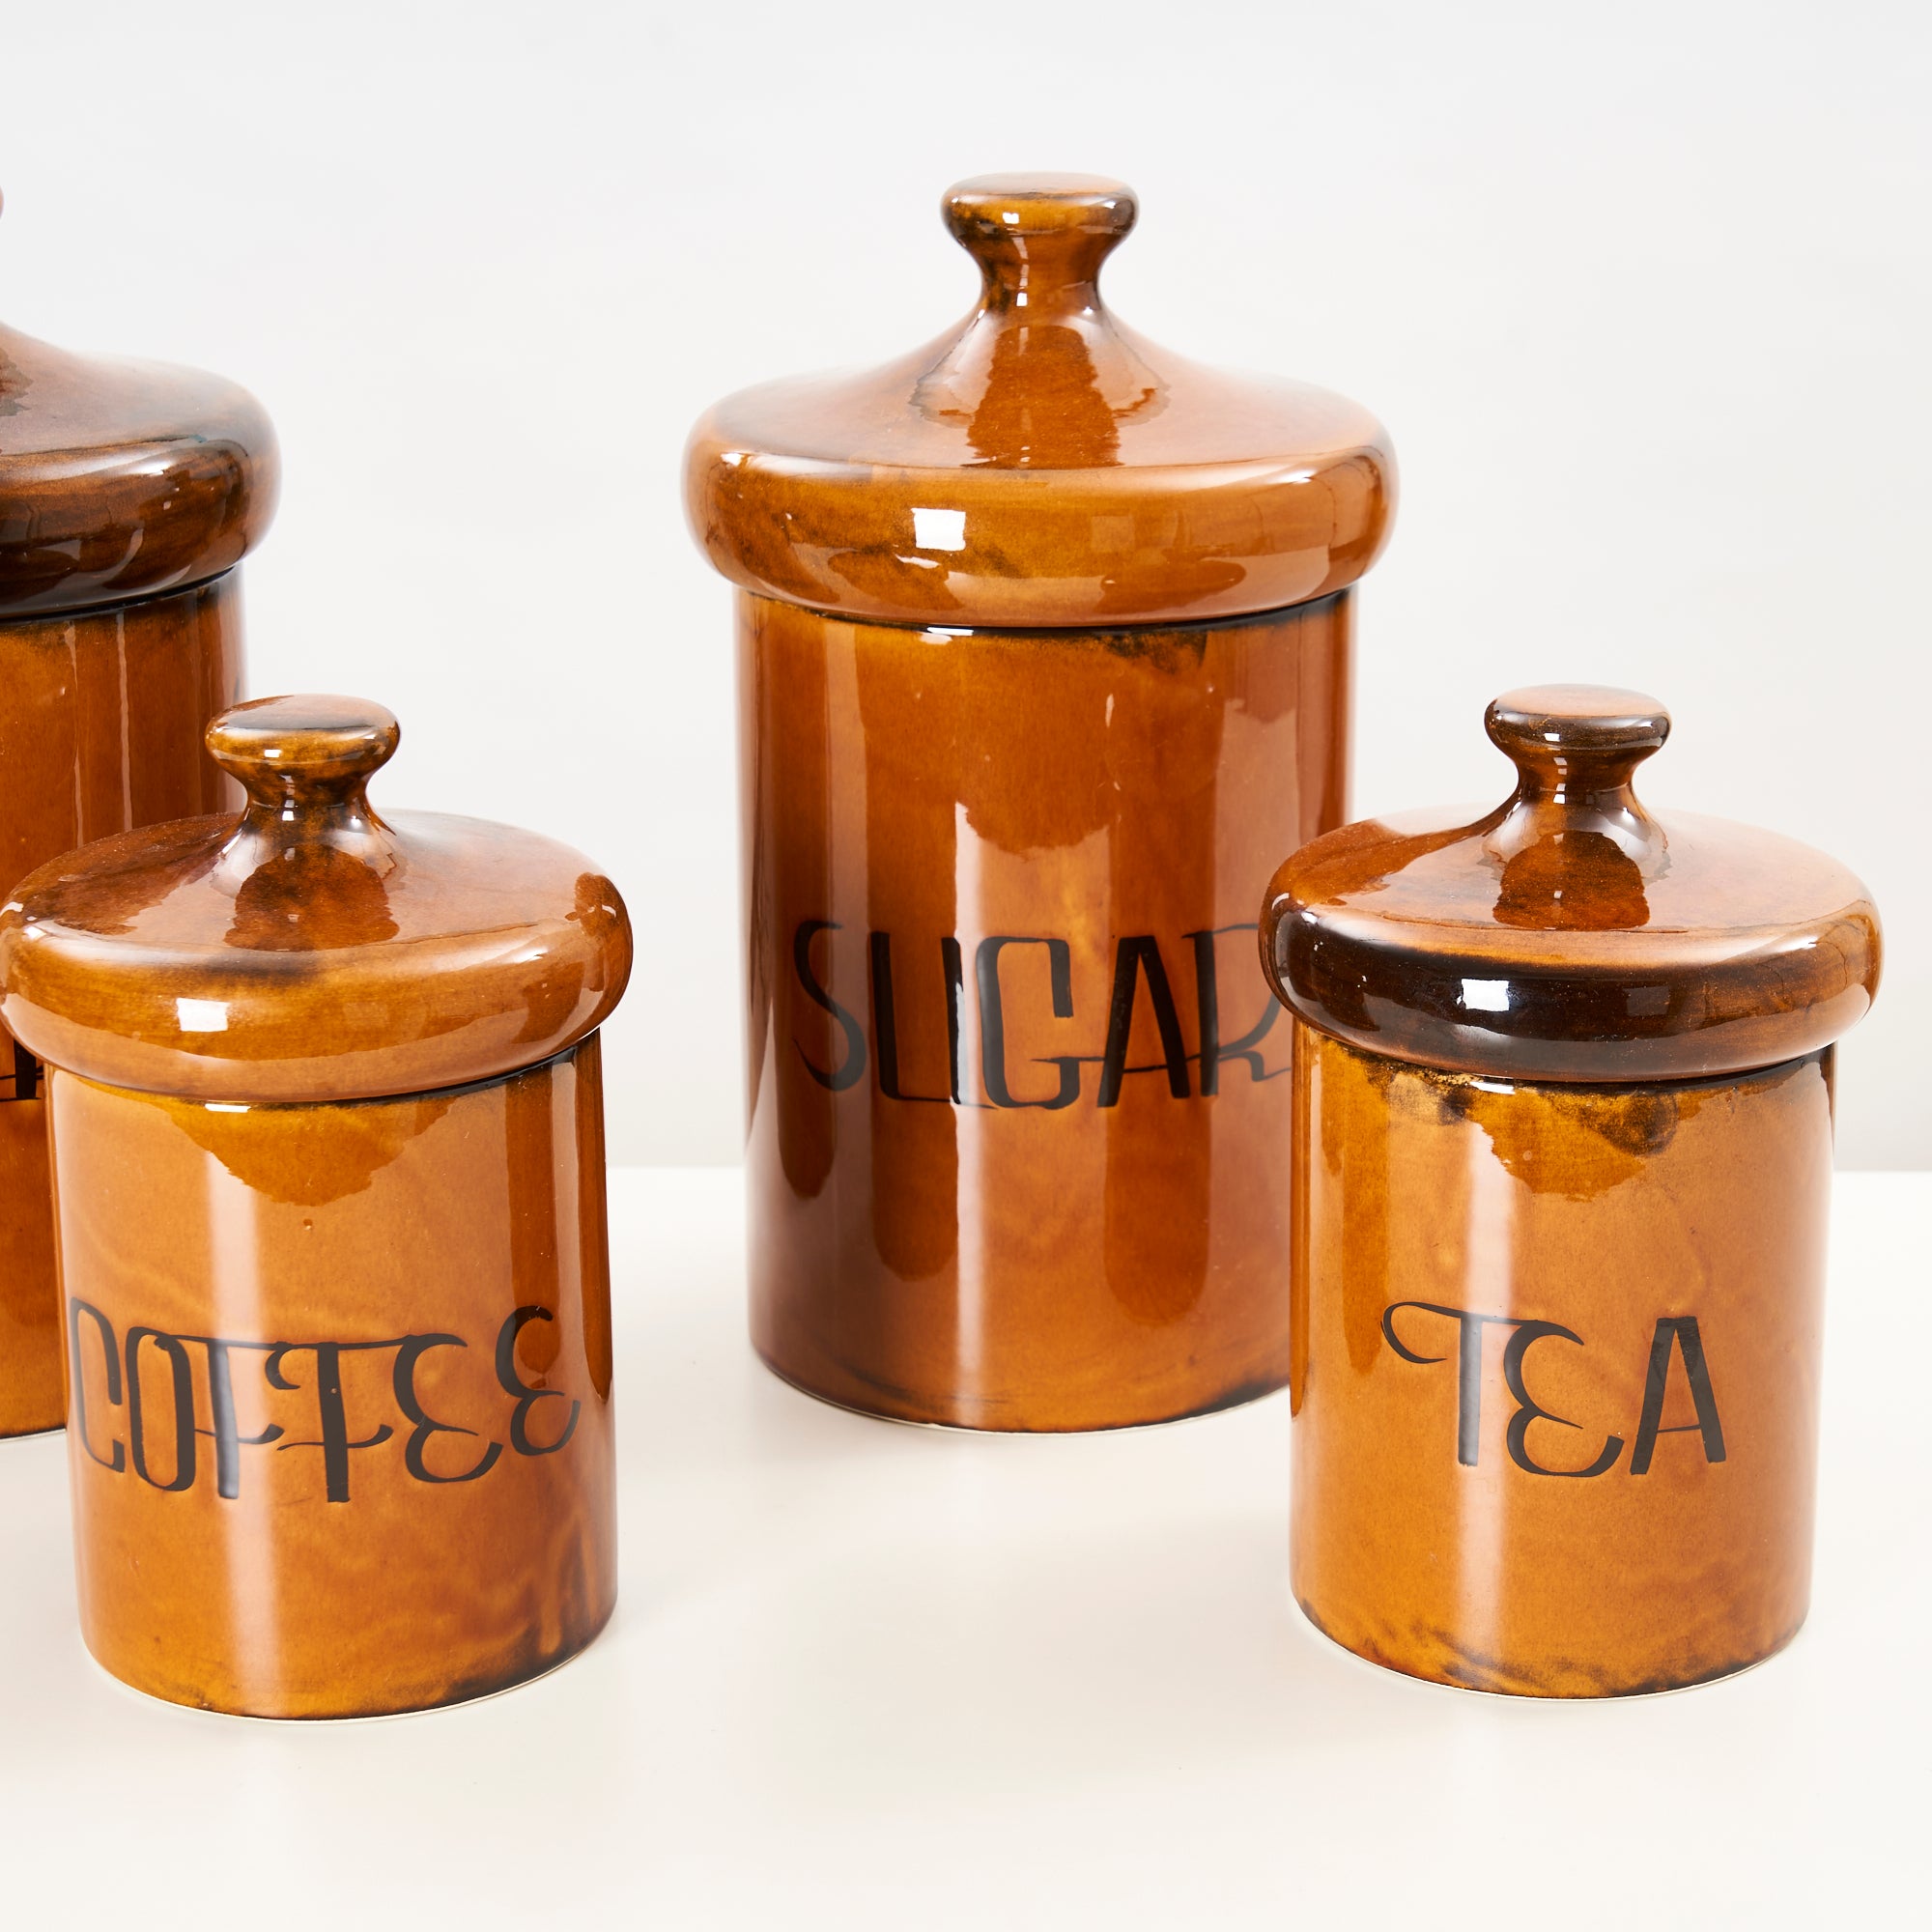 4 Piece Set of Ceramic Kitchen Canisters